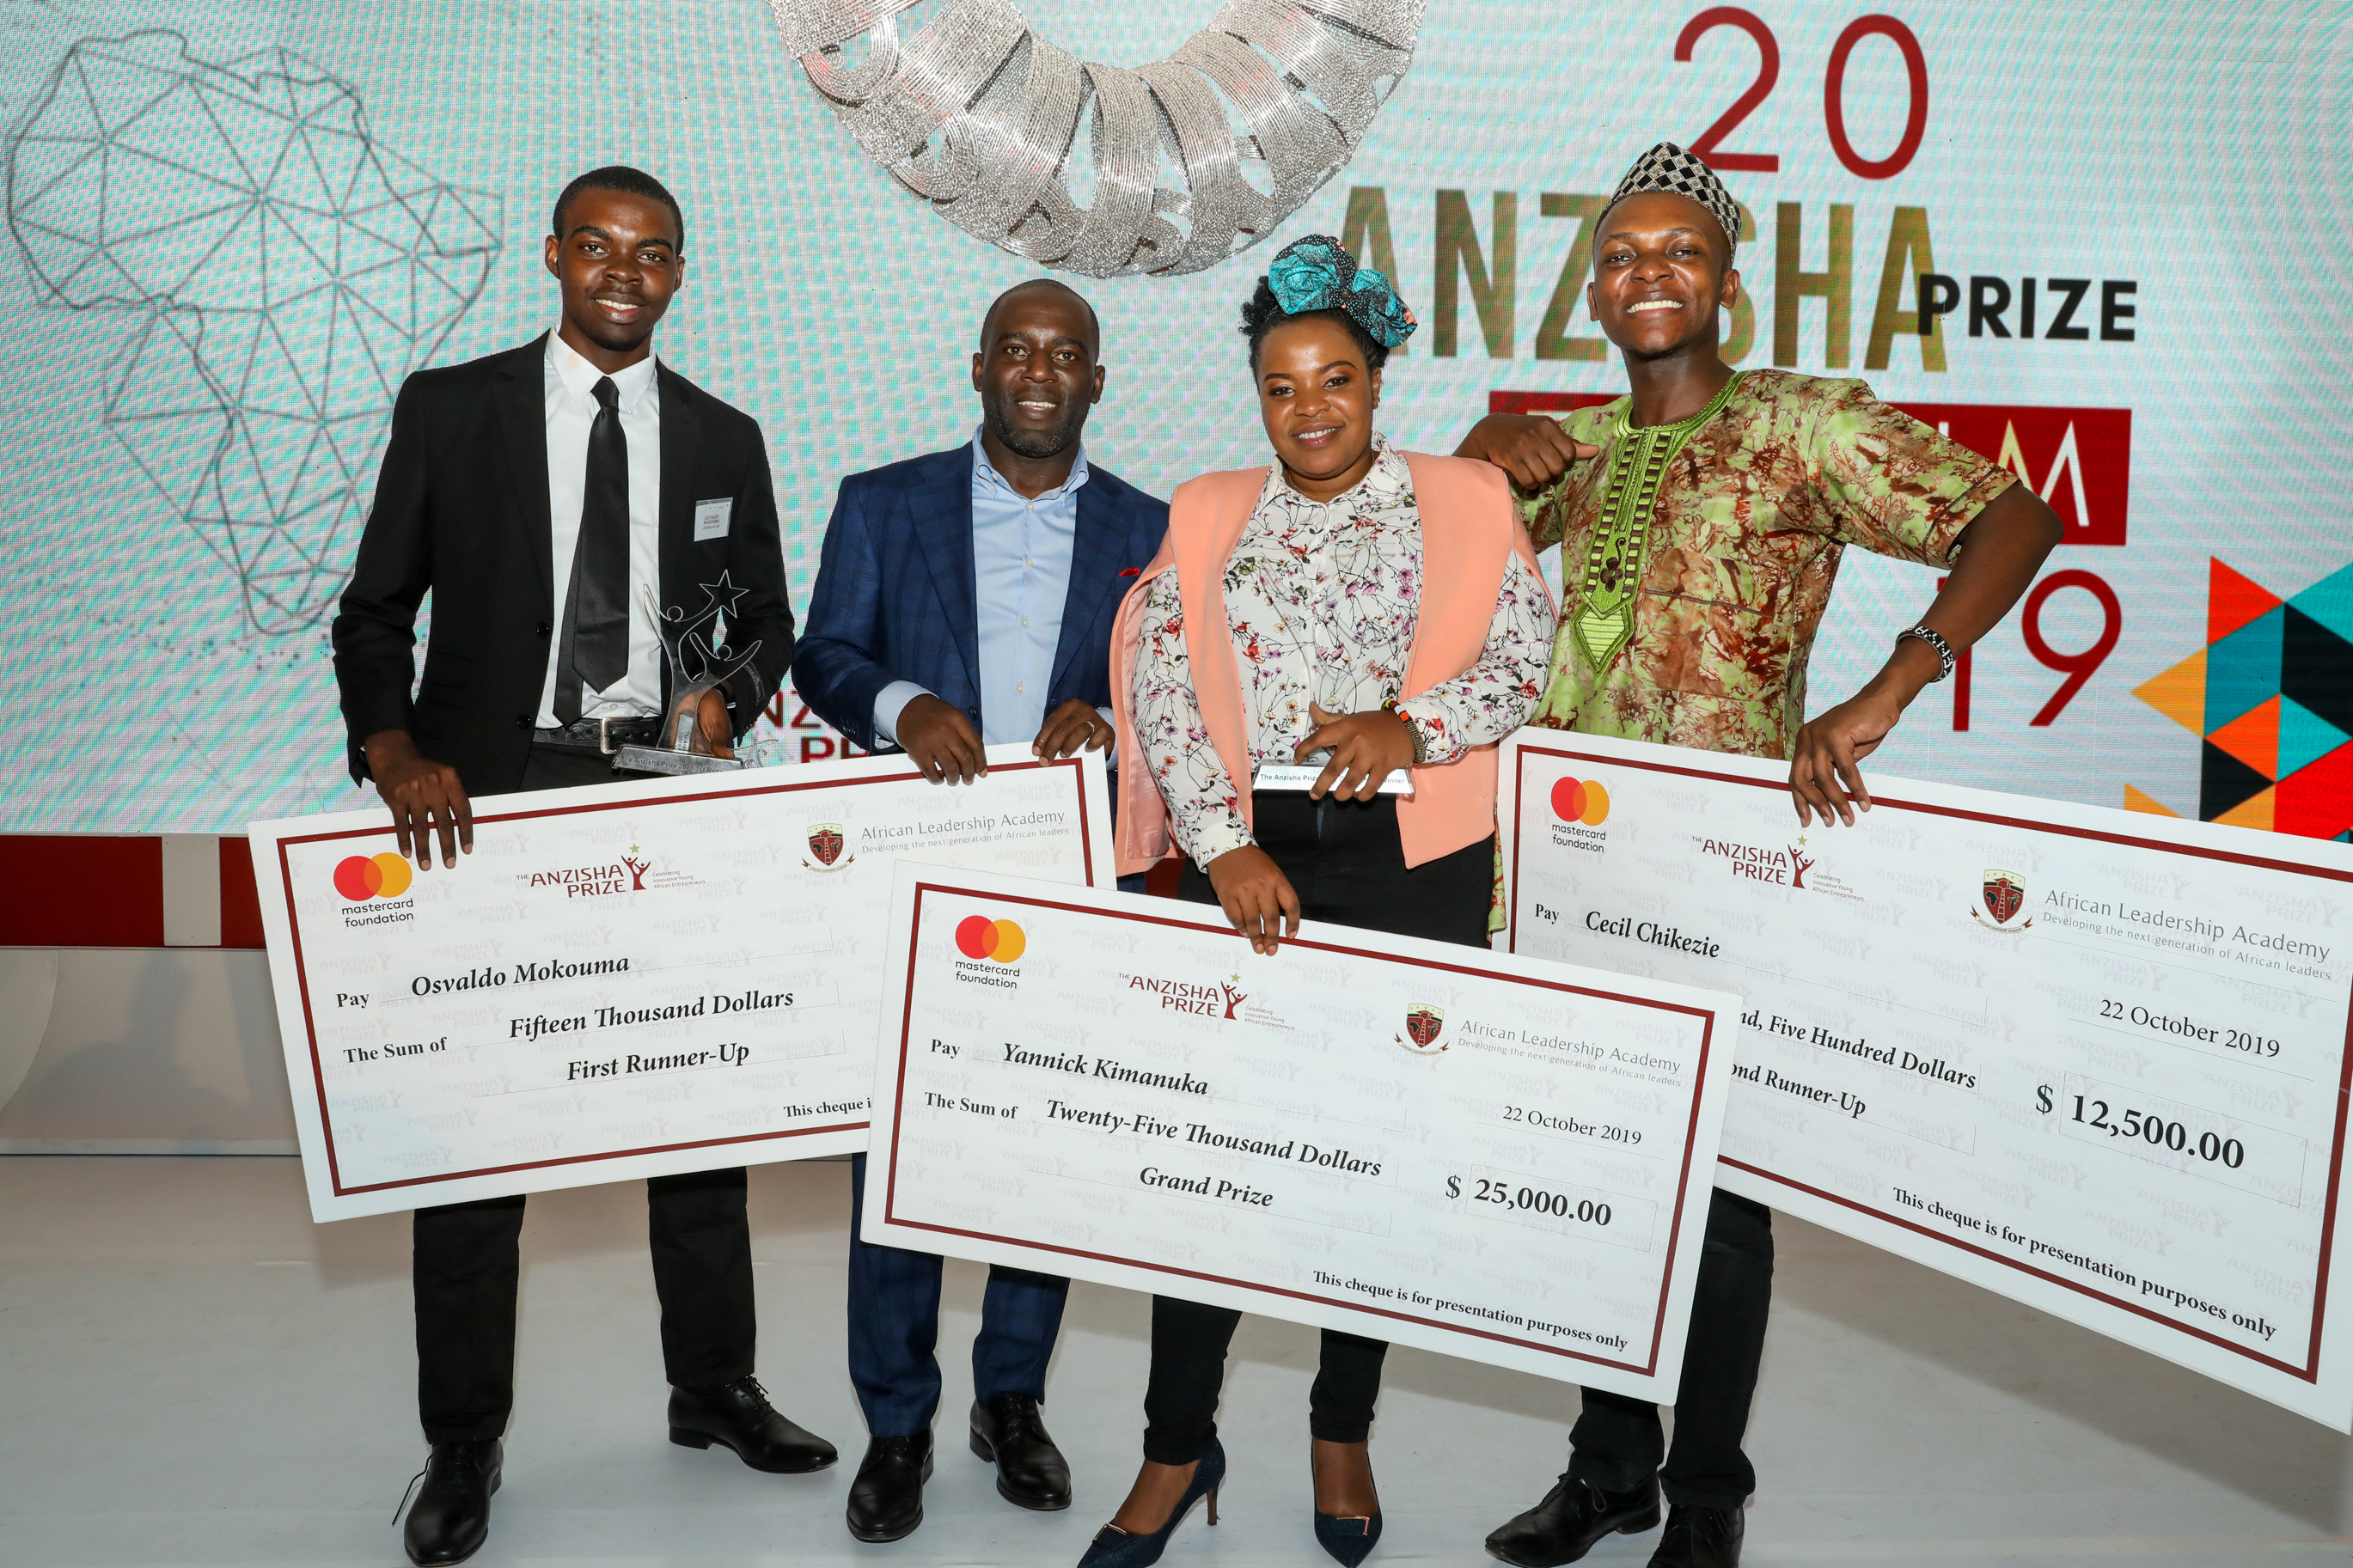 Cecil_Chikezie_takes-2nd_runners_up_at_the_anzisha_price_2019